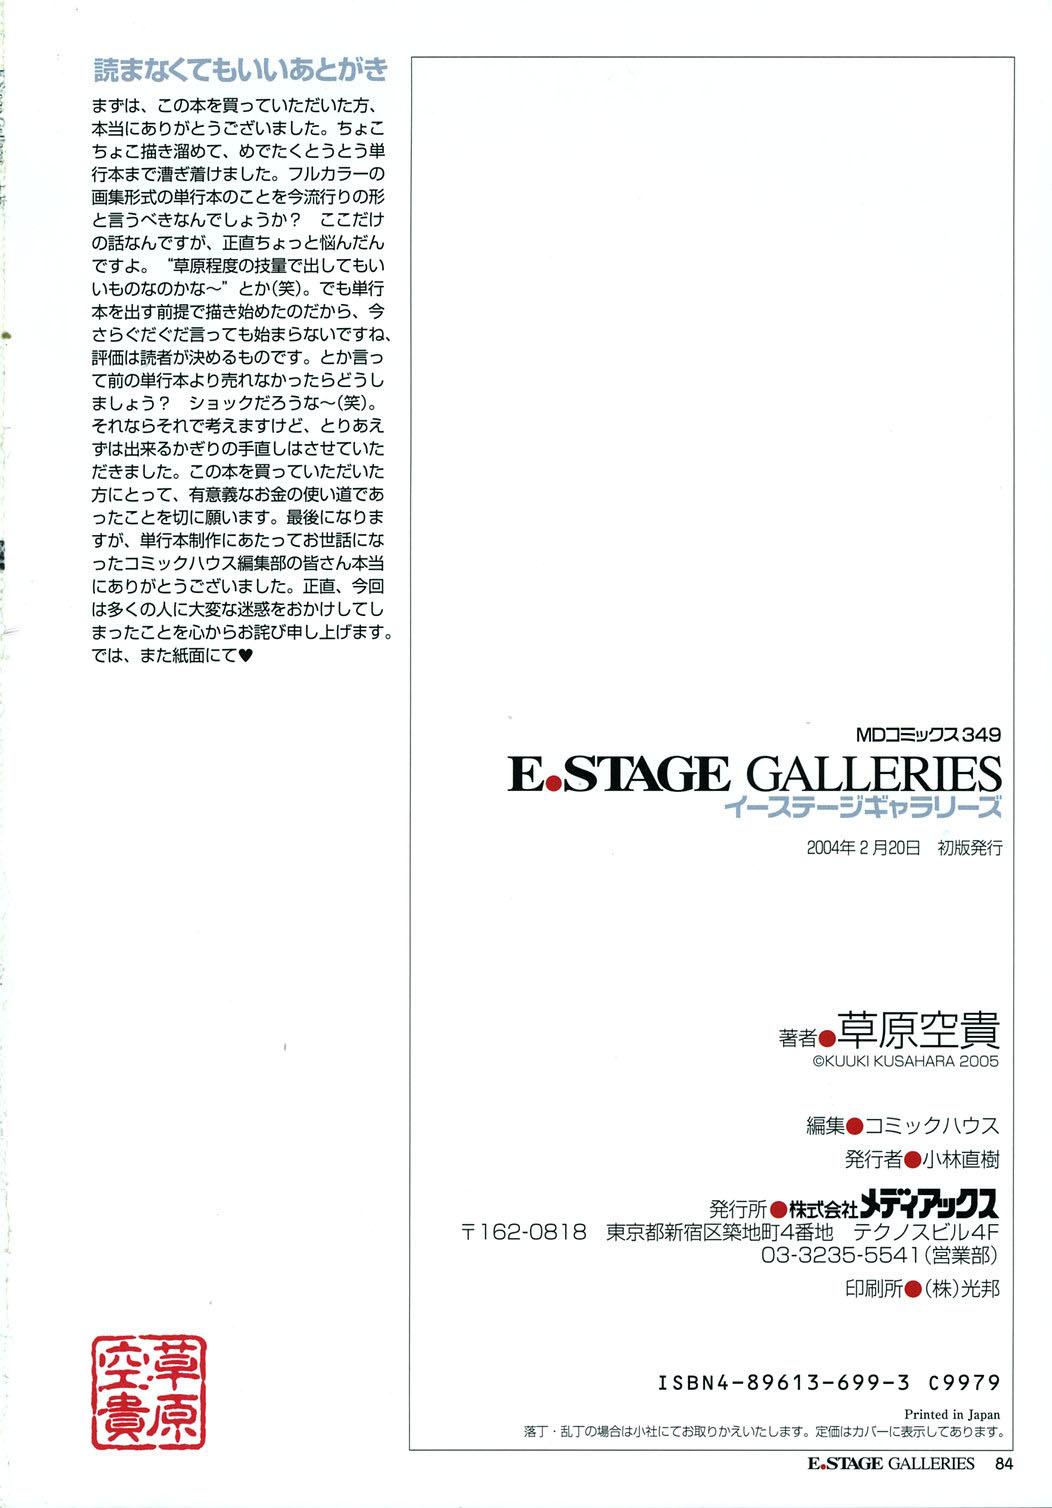 E.STAGE GALLERIES 96